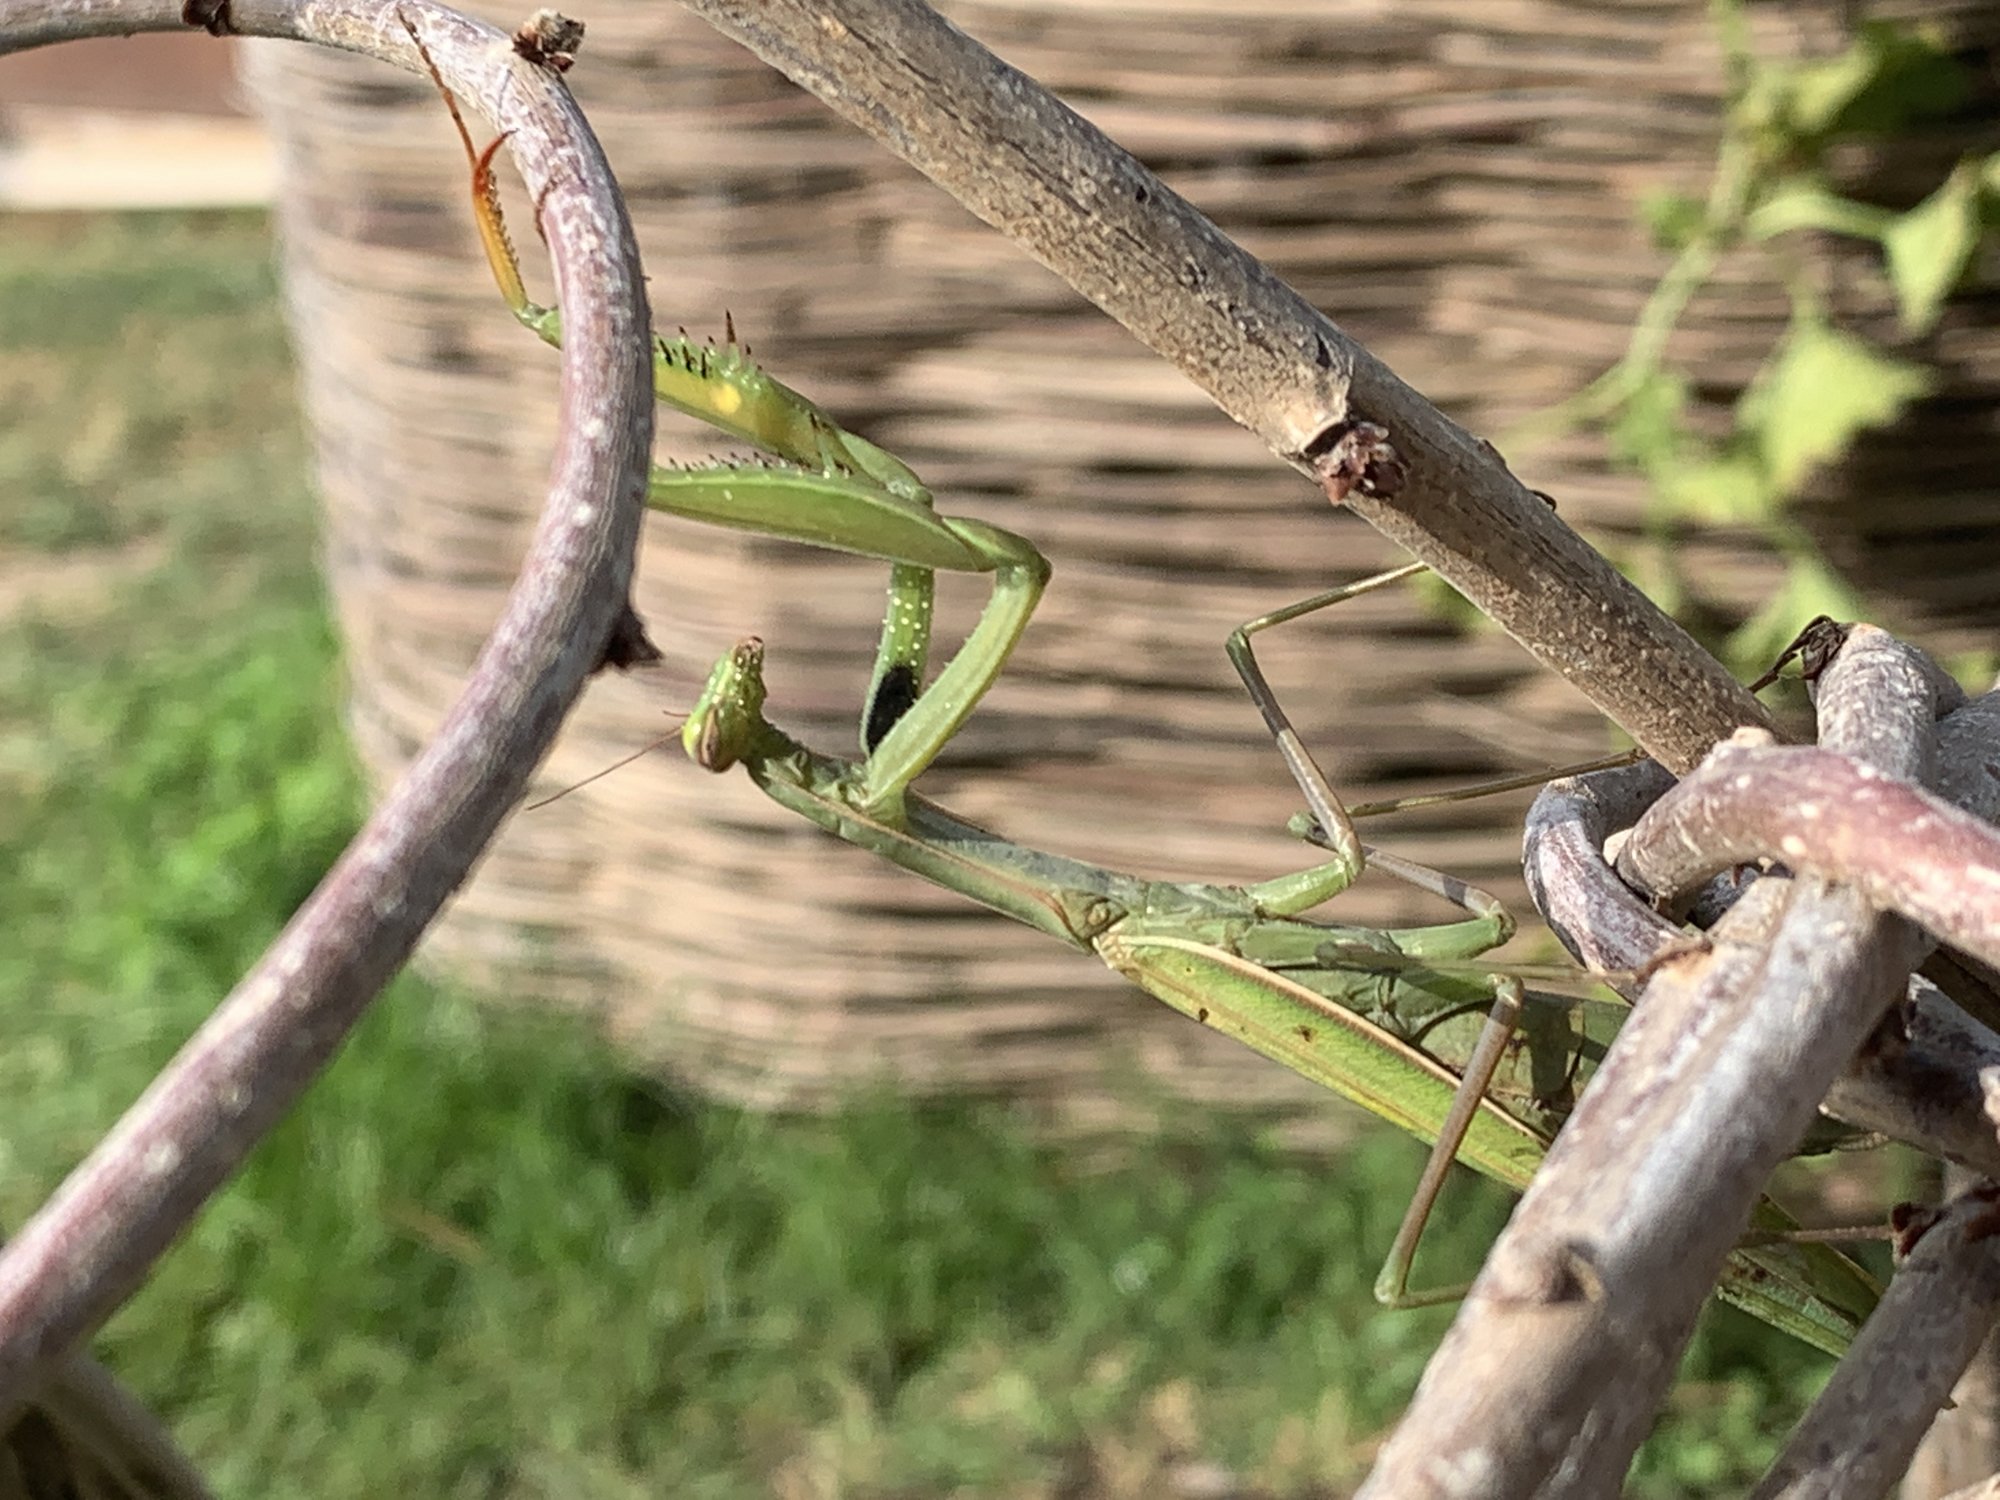  Detail of a Praying Mantis on the arbor, October 2022 